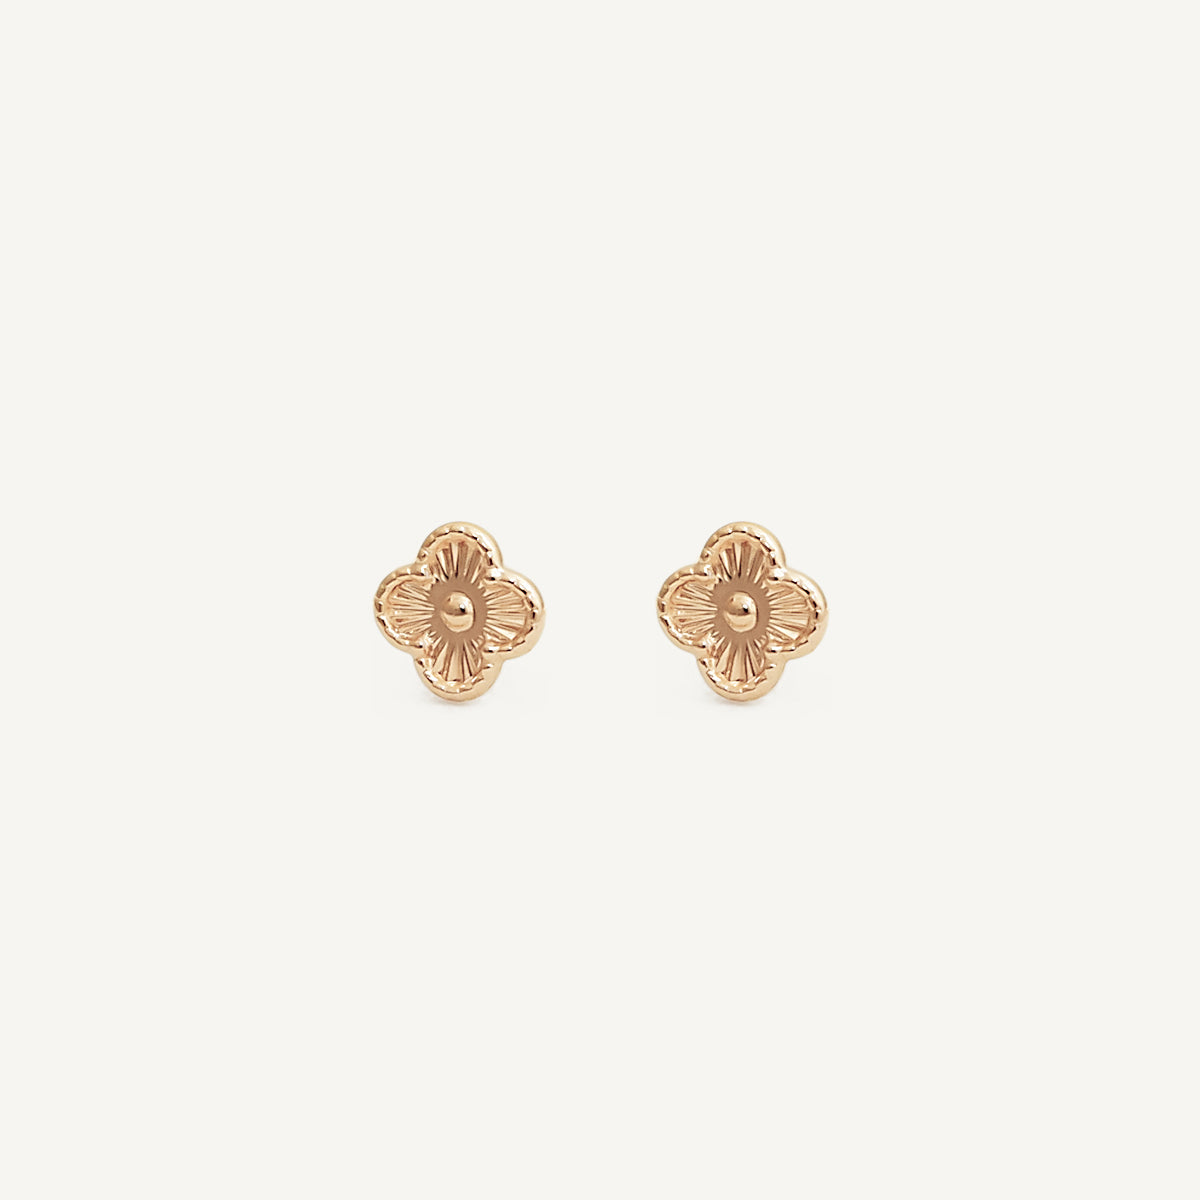 The Baby Alhambra Earrings in Solid Gold